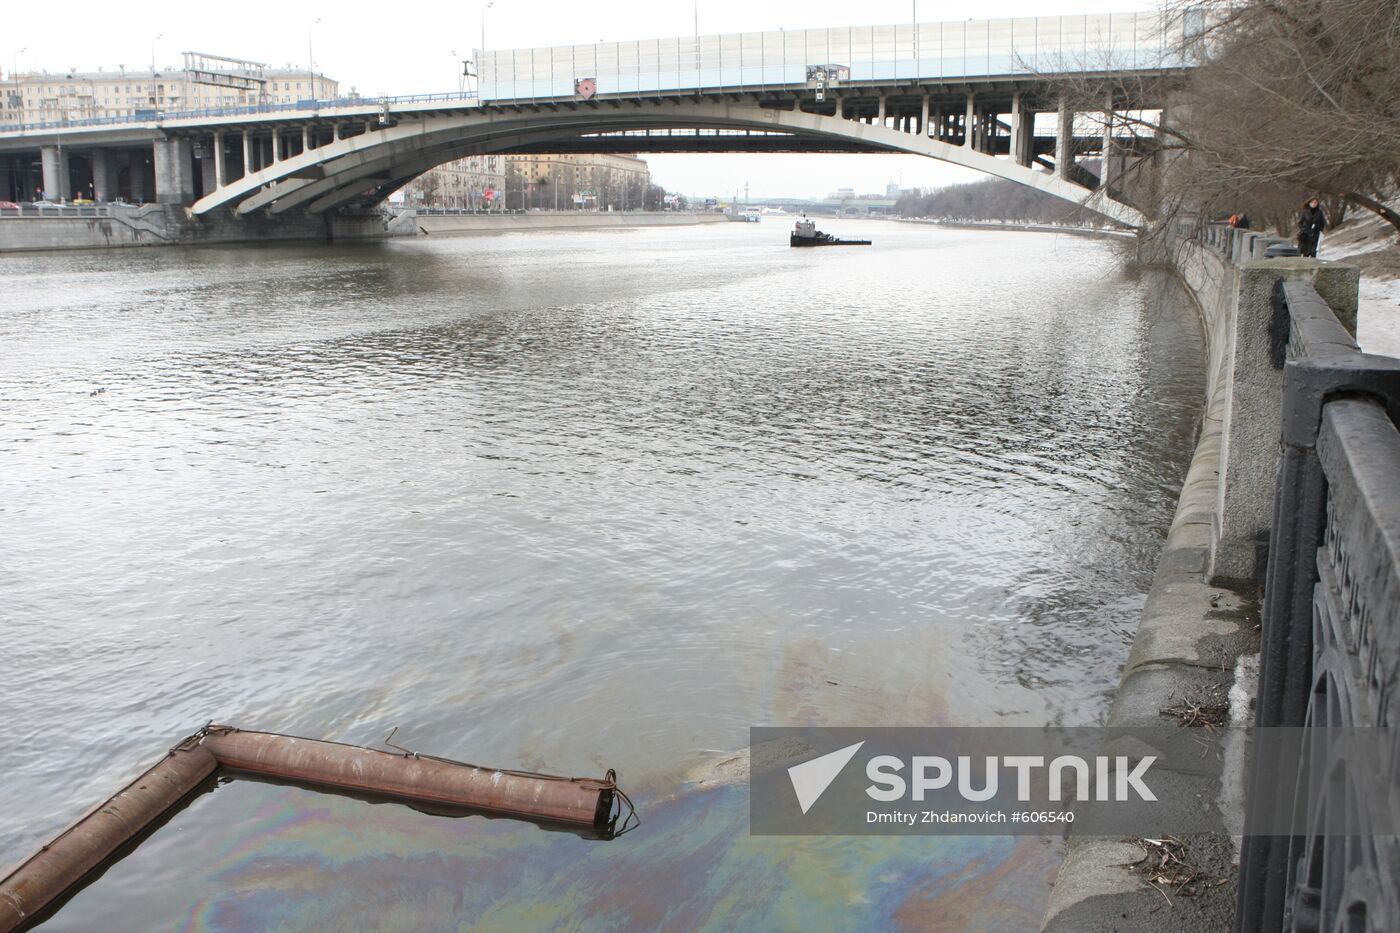 Oil film on Moscow River